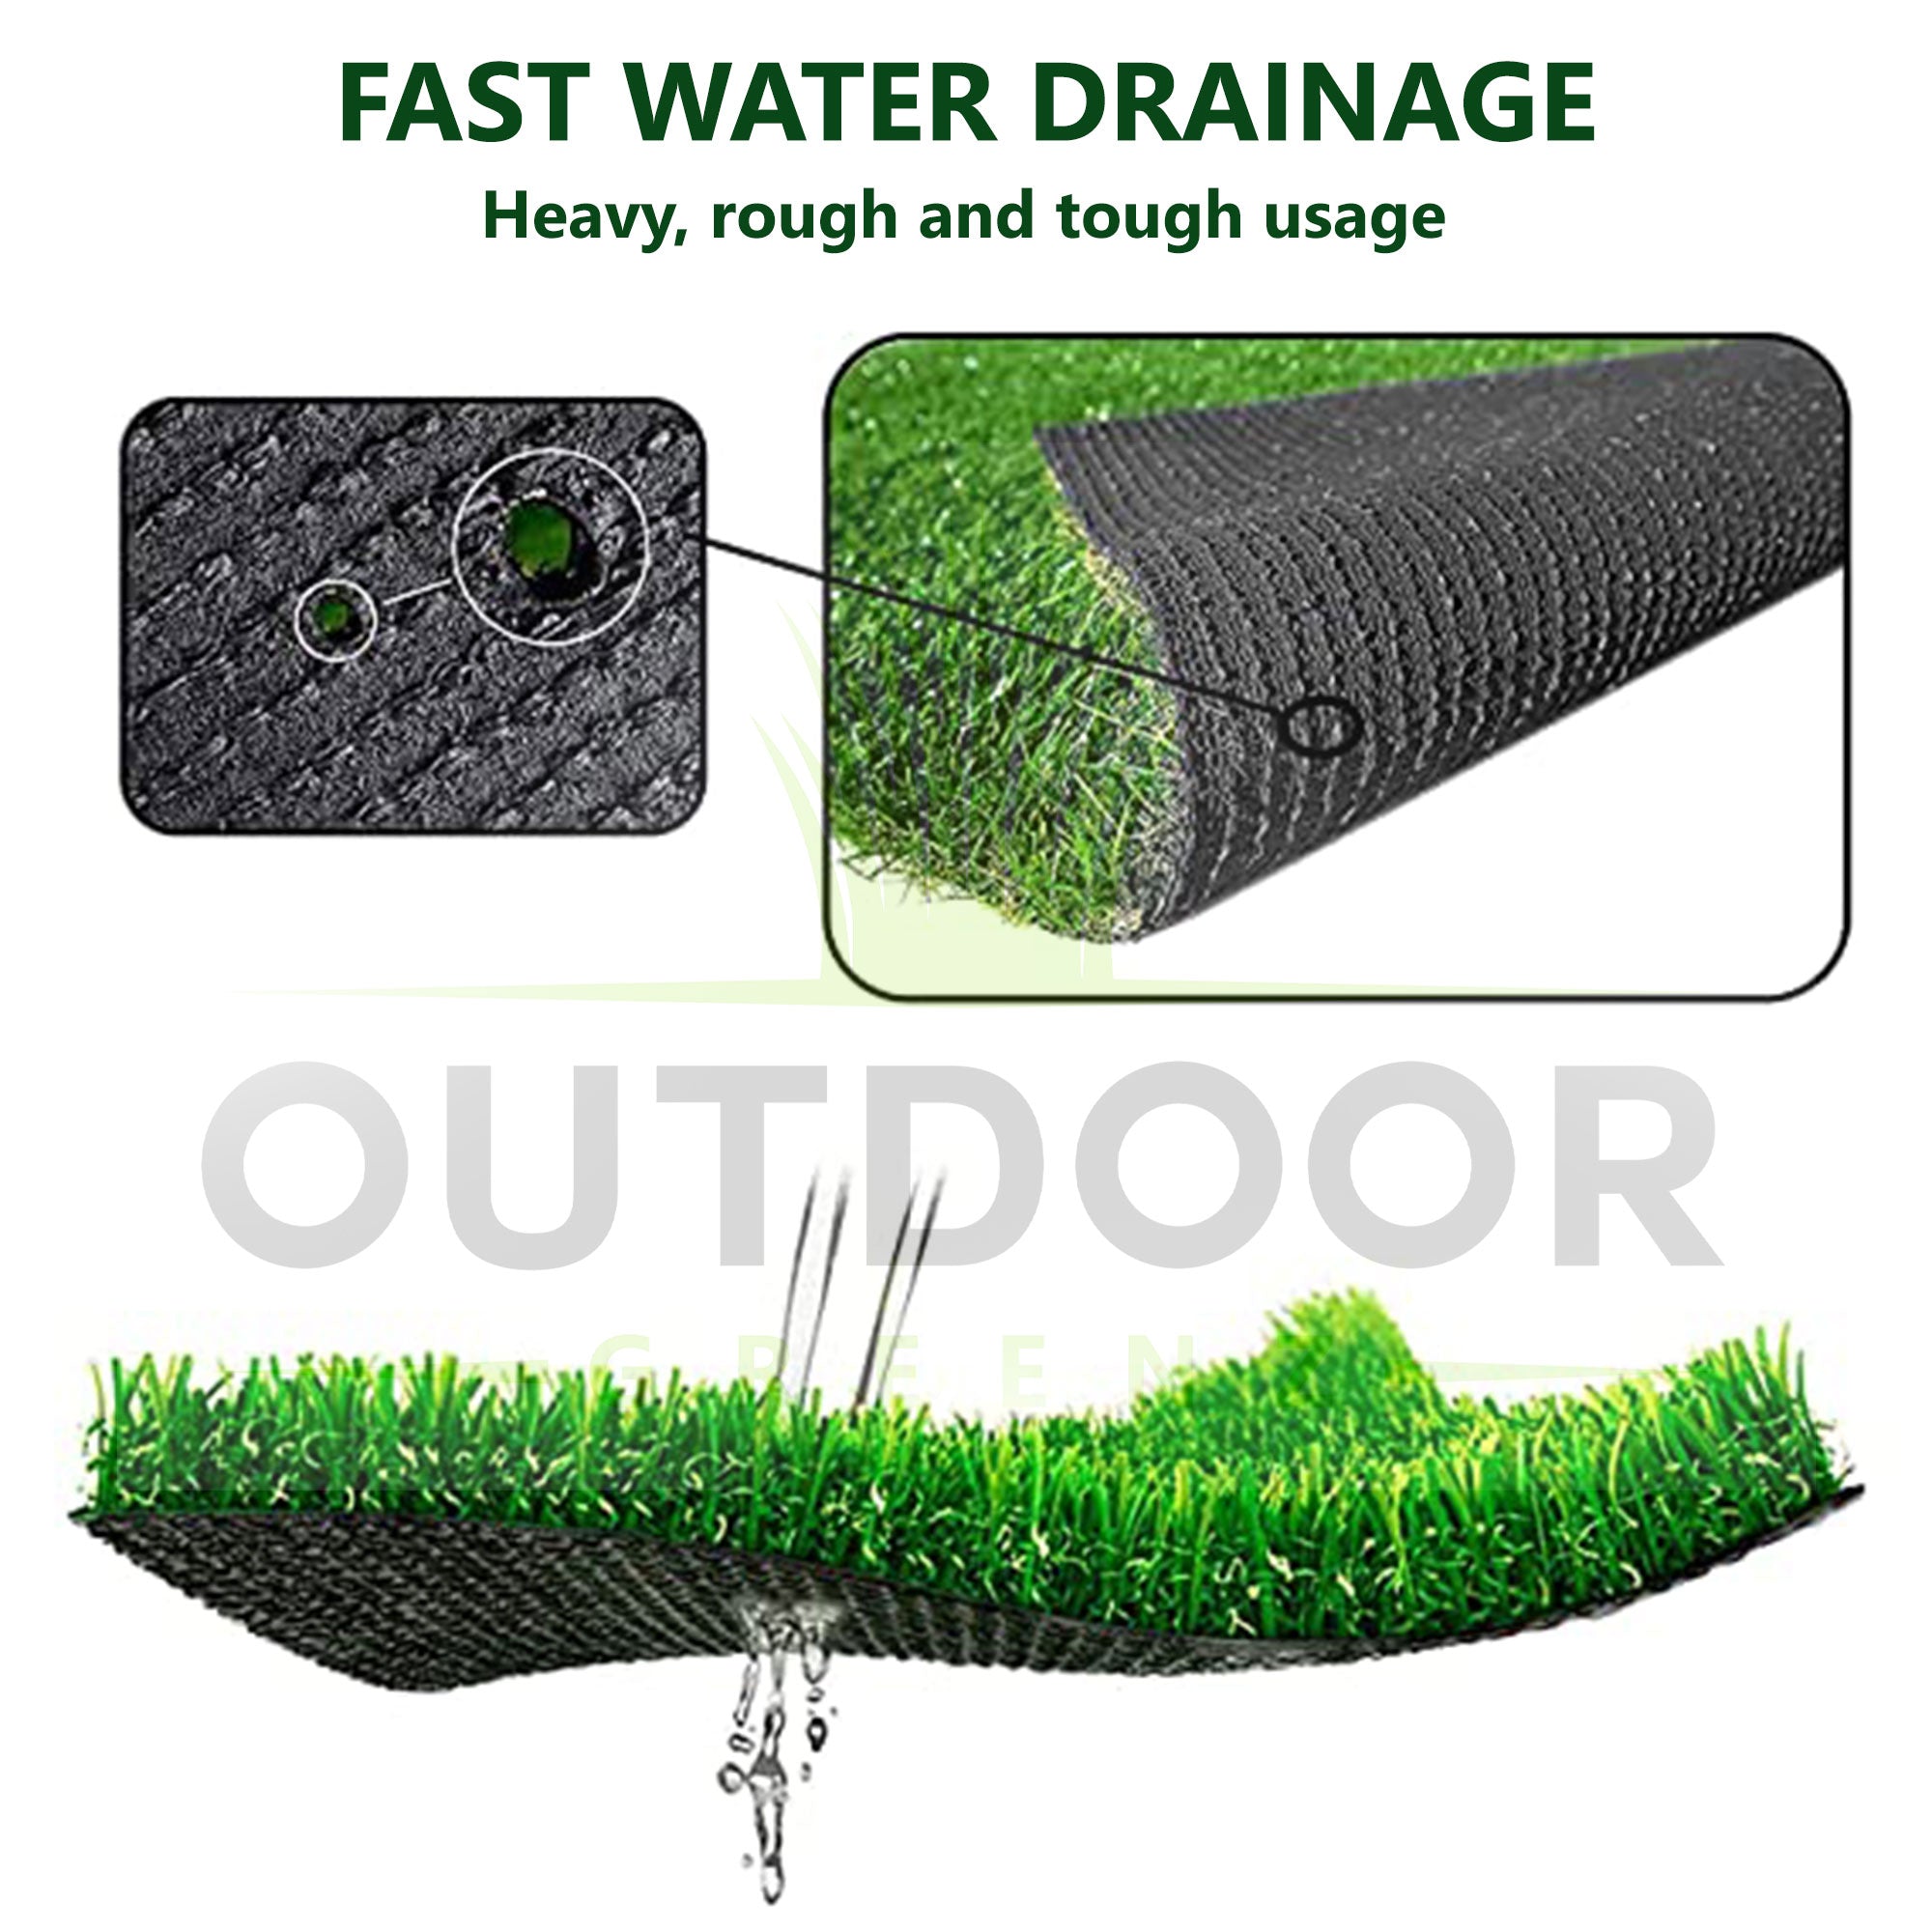 45 mm Realistic high density artificial synthetic grass.